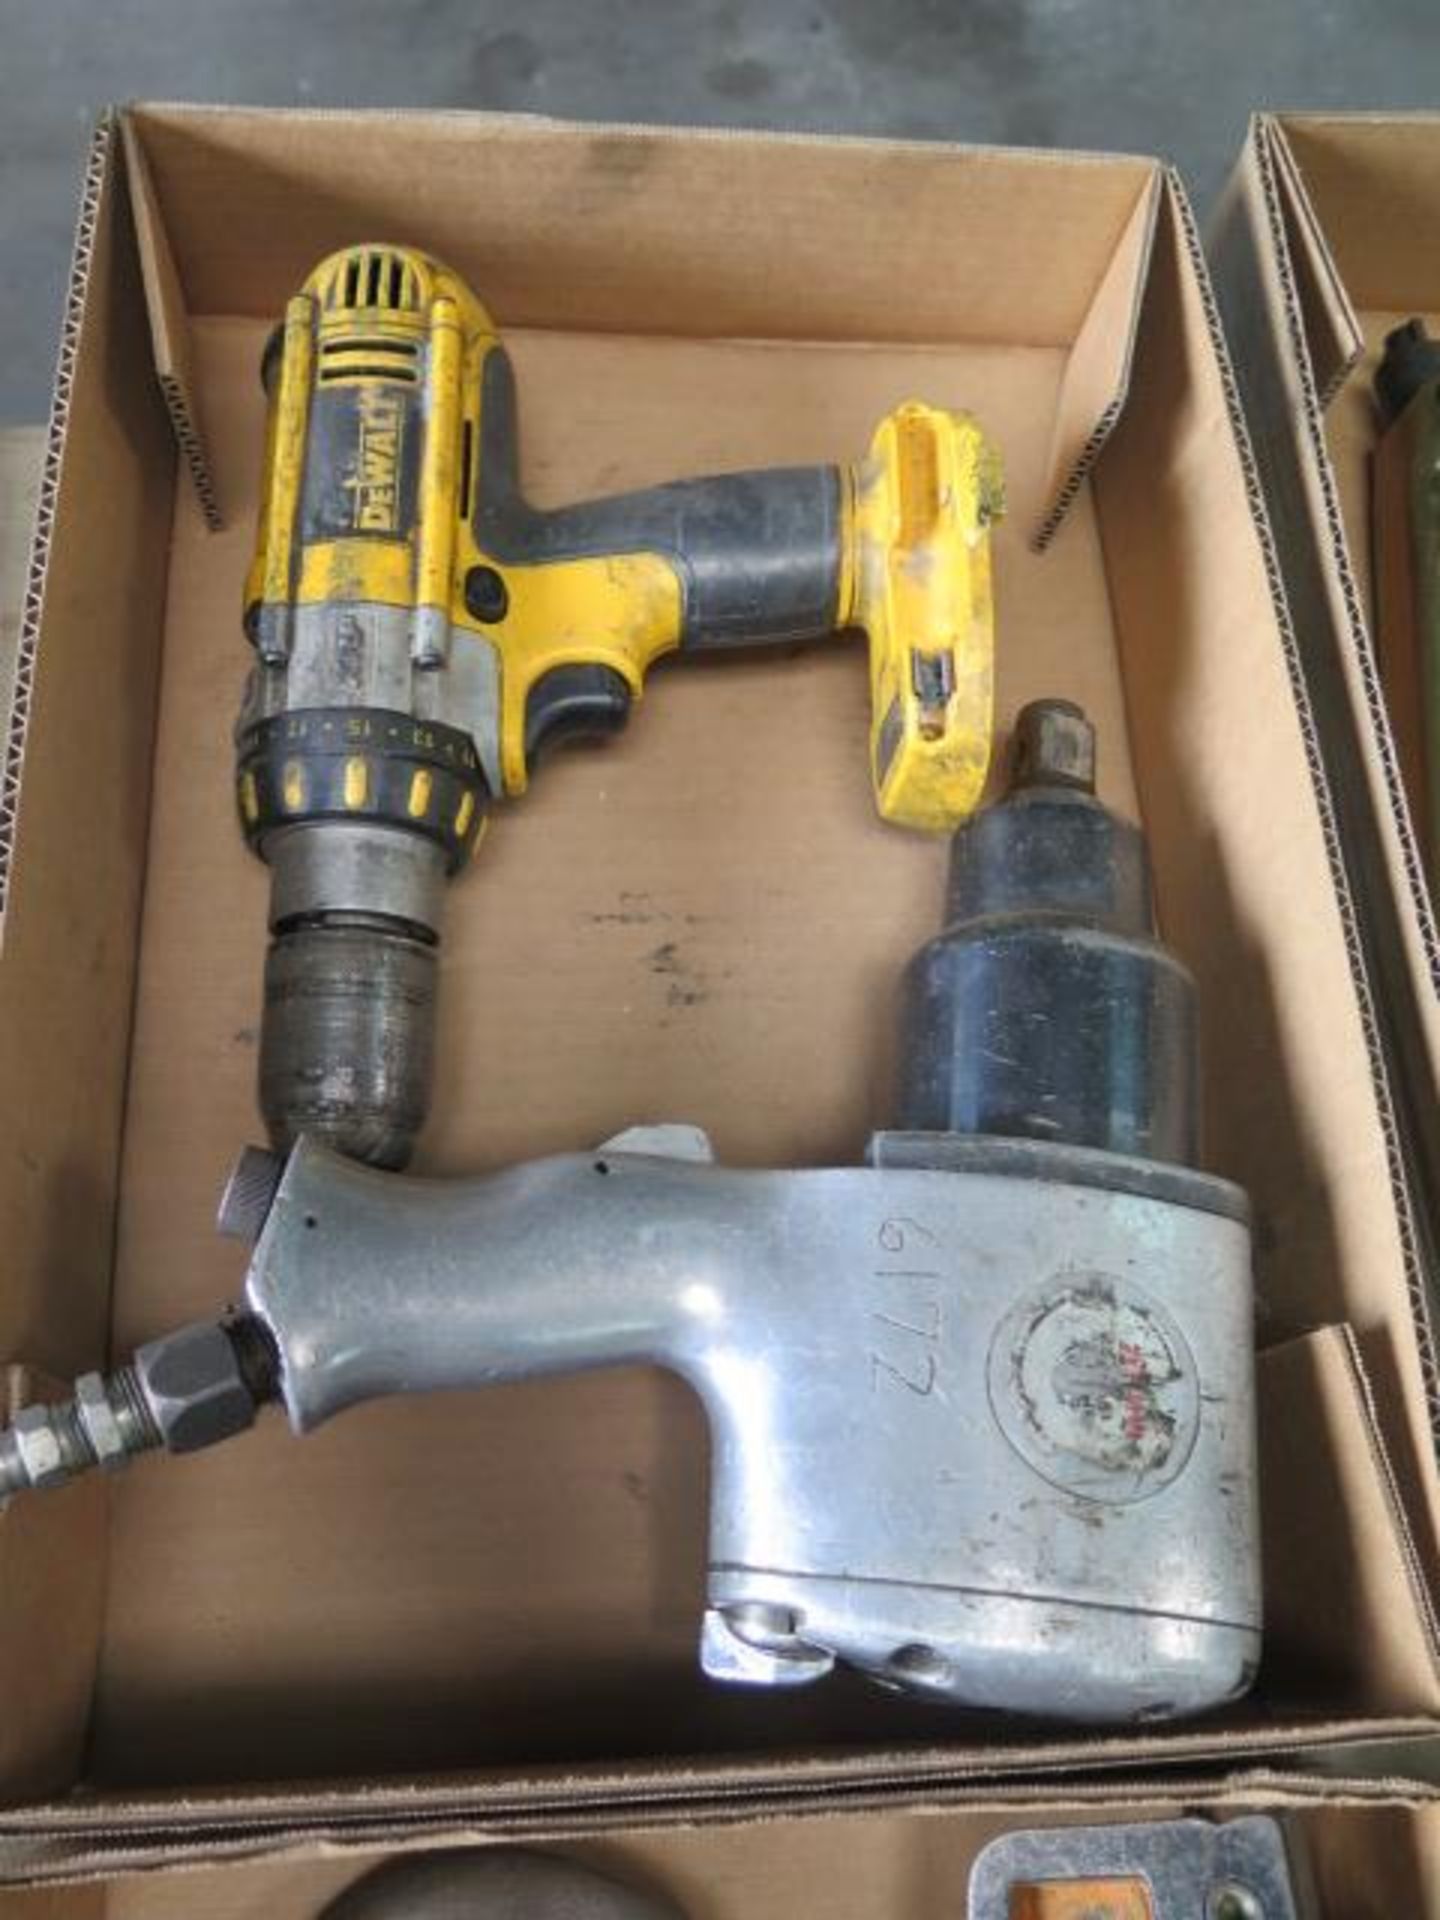 Pipe Cutters, Tube Bender, Pneumatic Impact and DeWalt Cordless Drill - Image 3 of 3